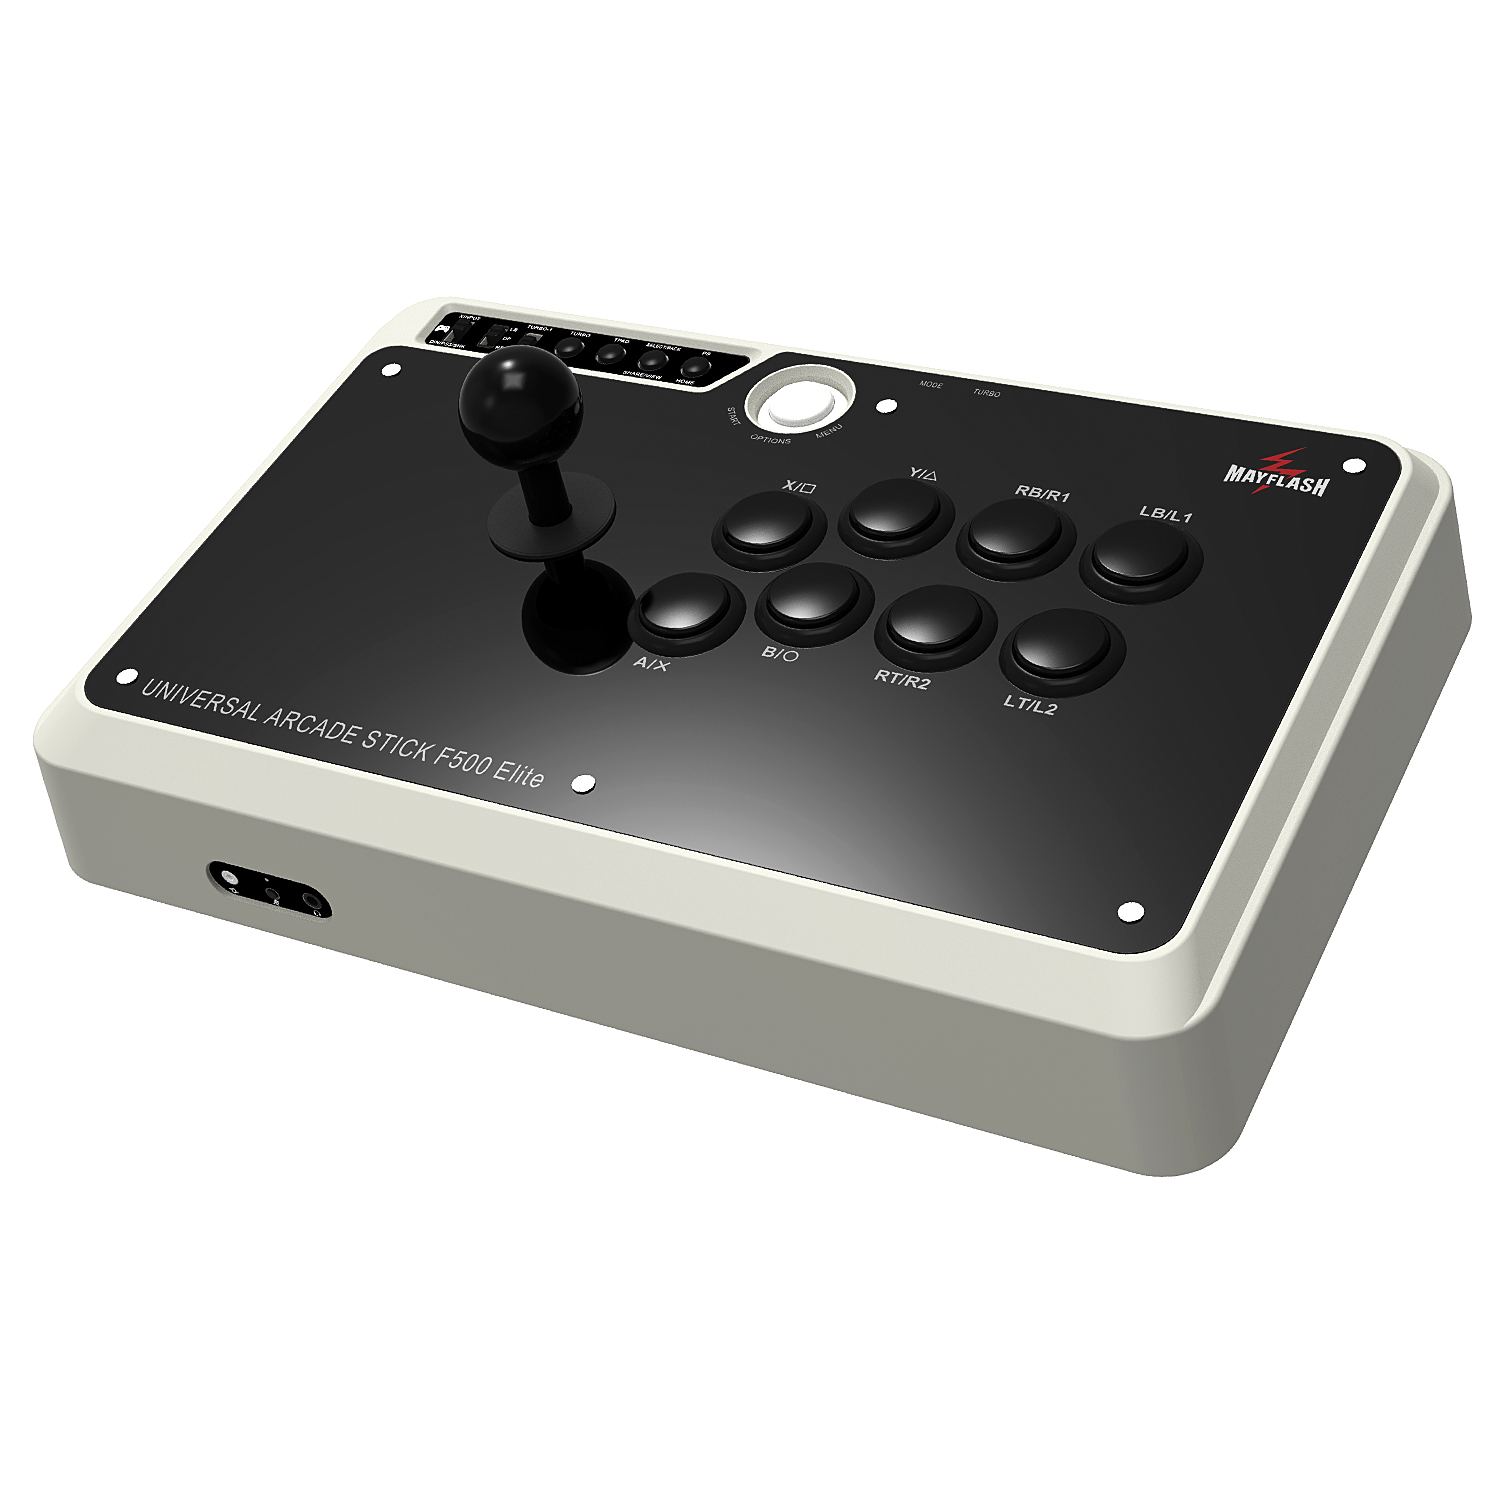 Universal Arcade Fighting Stick F500 Elite for PC, PS3, X360, PS3 Slim,  PS4, XONE, Android, Xbox One S, SW, XONE X, XSX, XSS - Bitcoin & Lightning  accepted